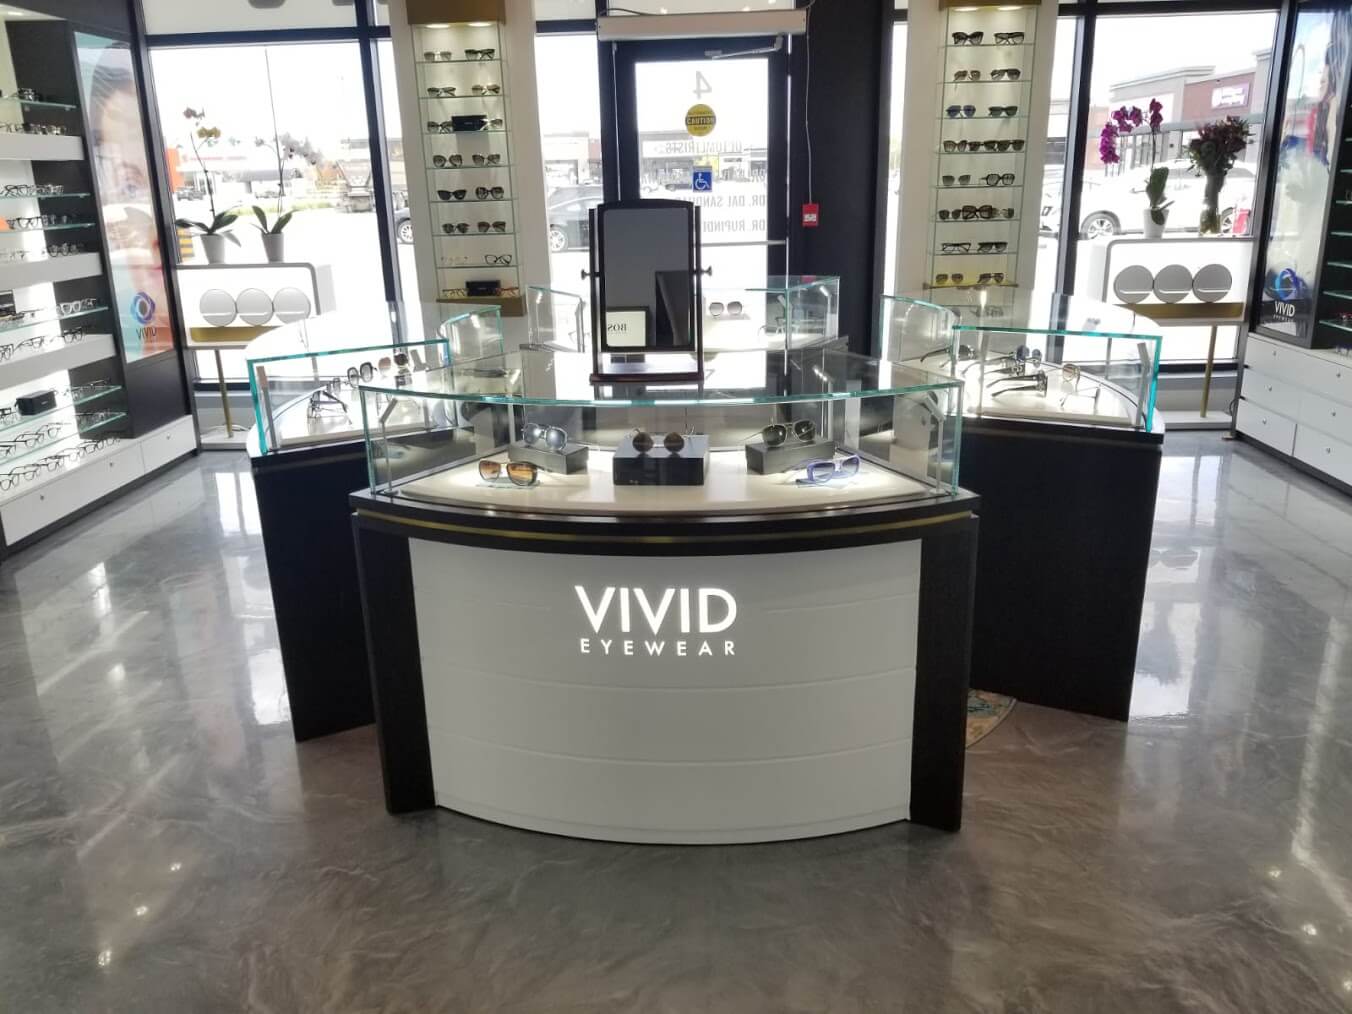 Vivid On-Site Eye Care That Comes To You